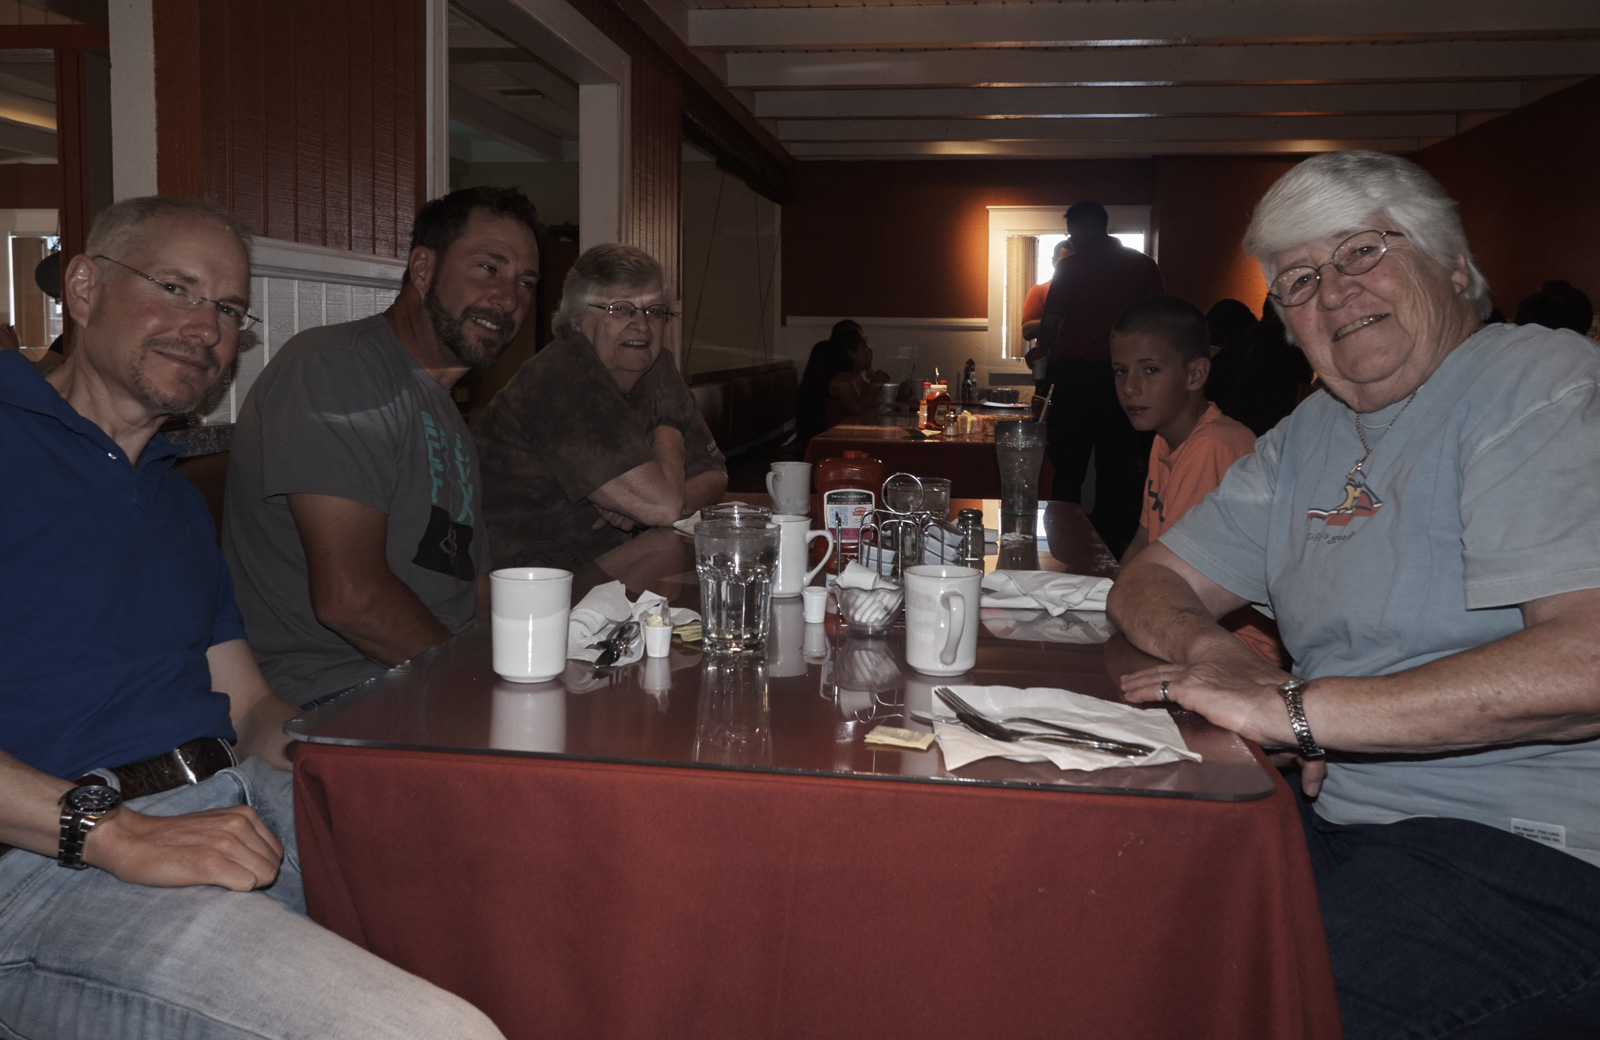 Marc, Tom, MarLyn, Hunter, and Aunt Pat waiting for breakfast at LUGO'S restaurant